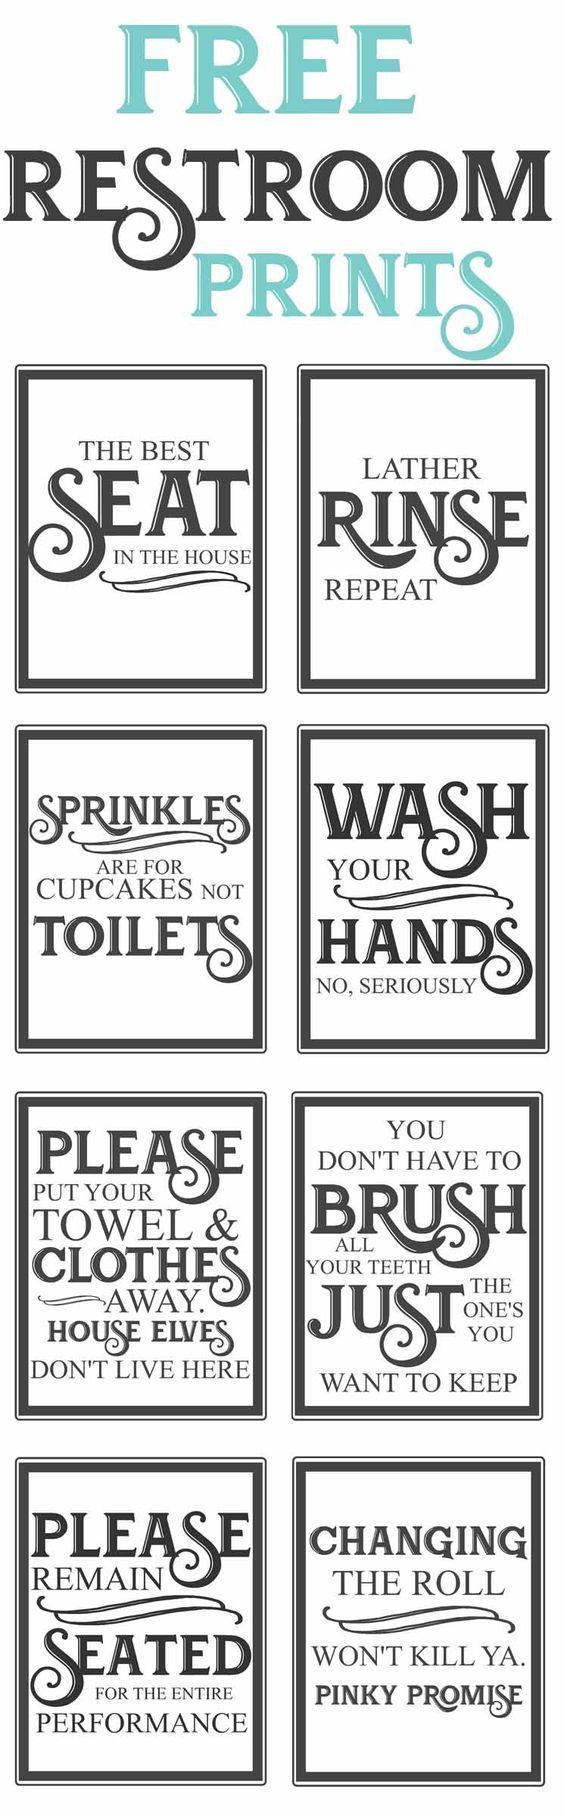 Free Vintage inspired bathroom printables-funny quotes to hang up in the restroom-farmhouse